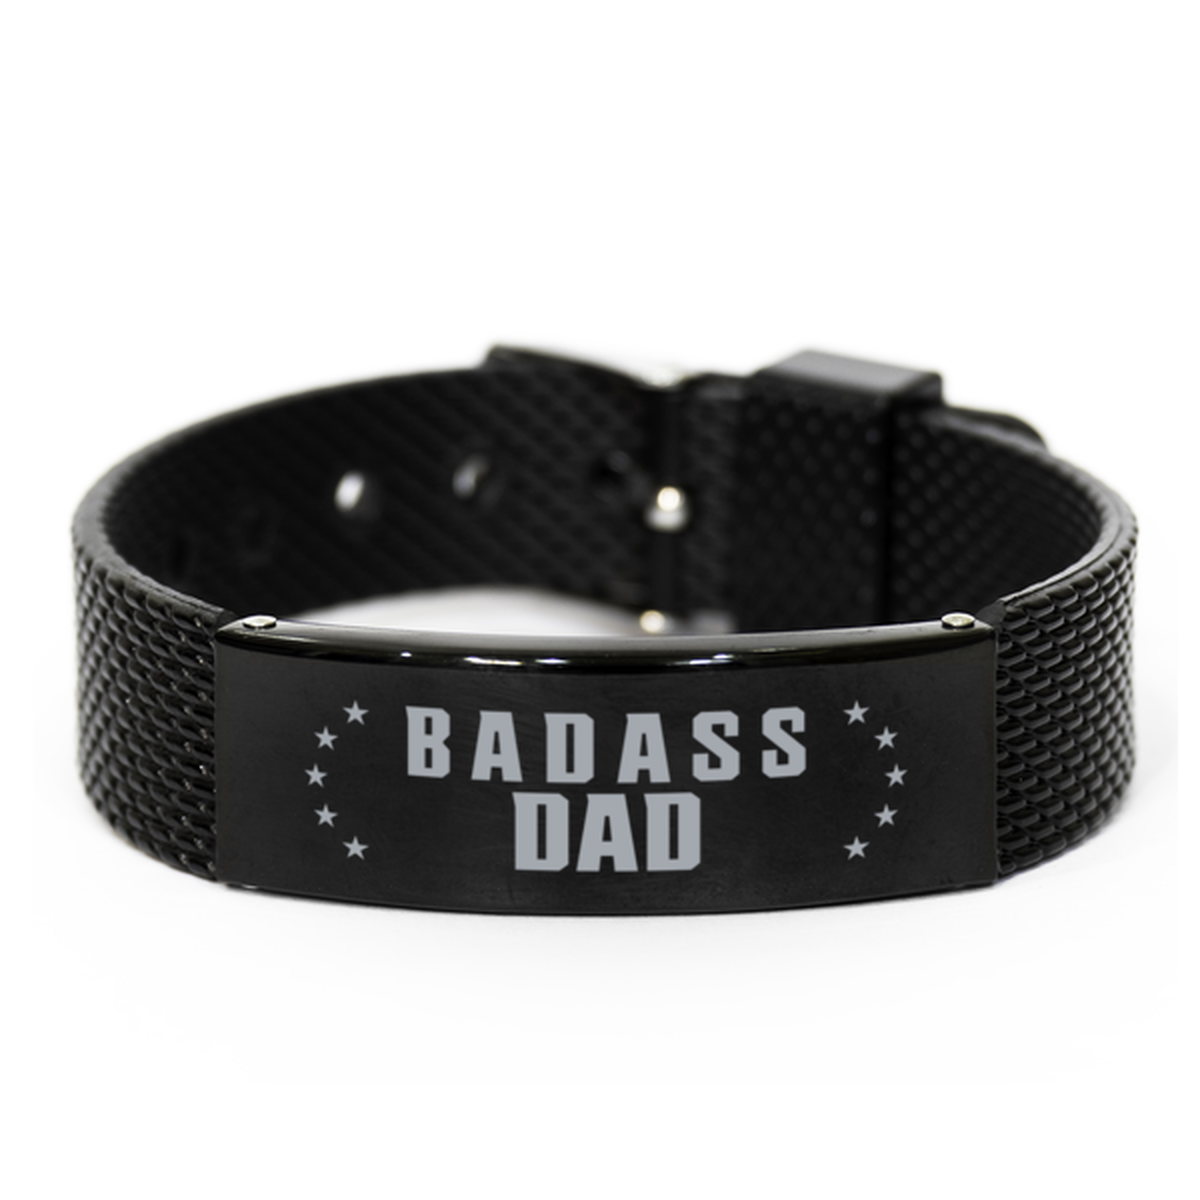 Dad Black Shark Mesh Bracelet, Badass Dad, Funny Family Gifts For Dad From Son Daughter